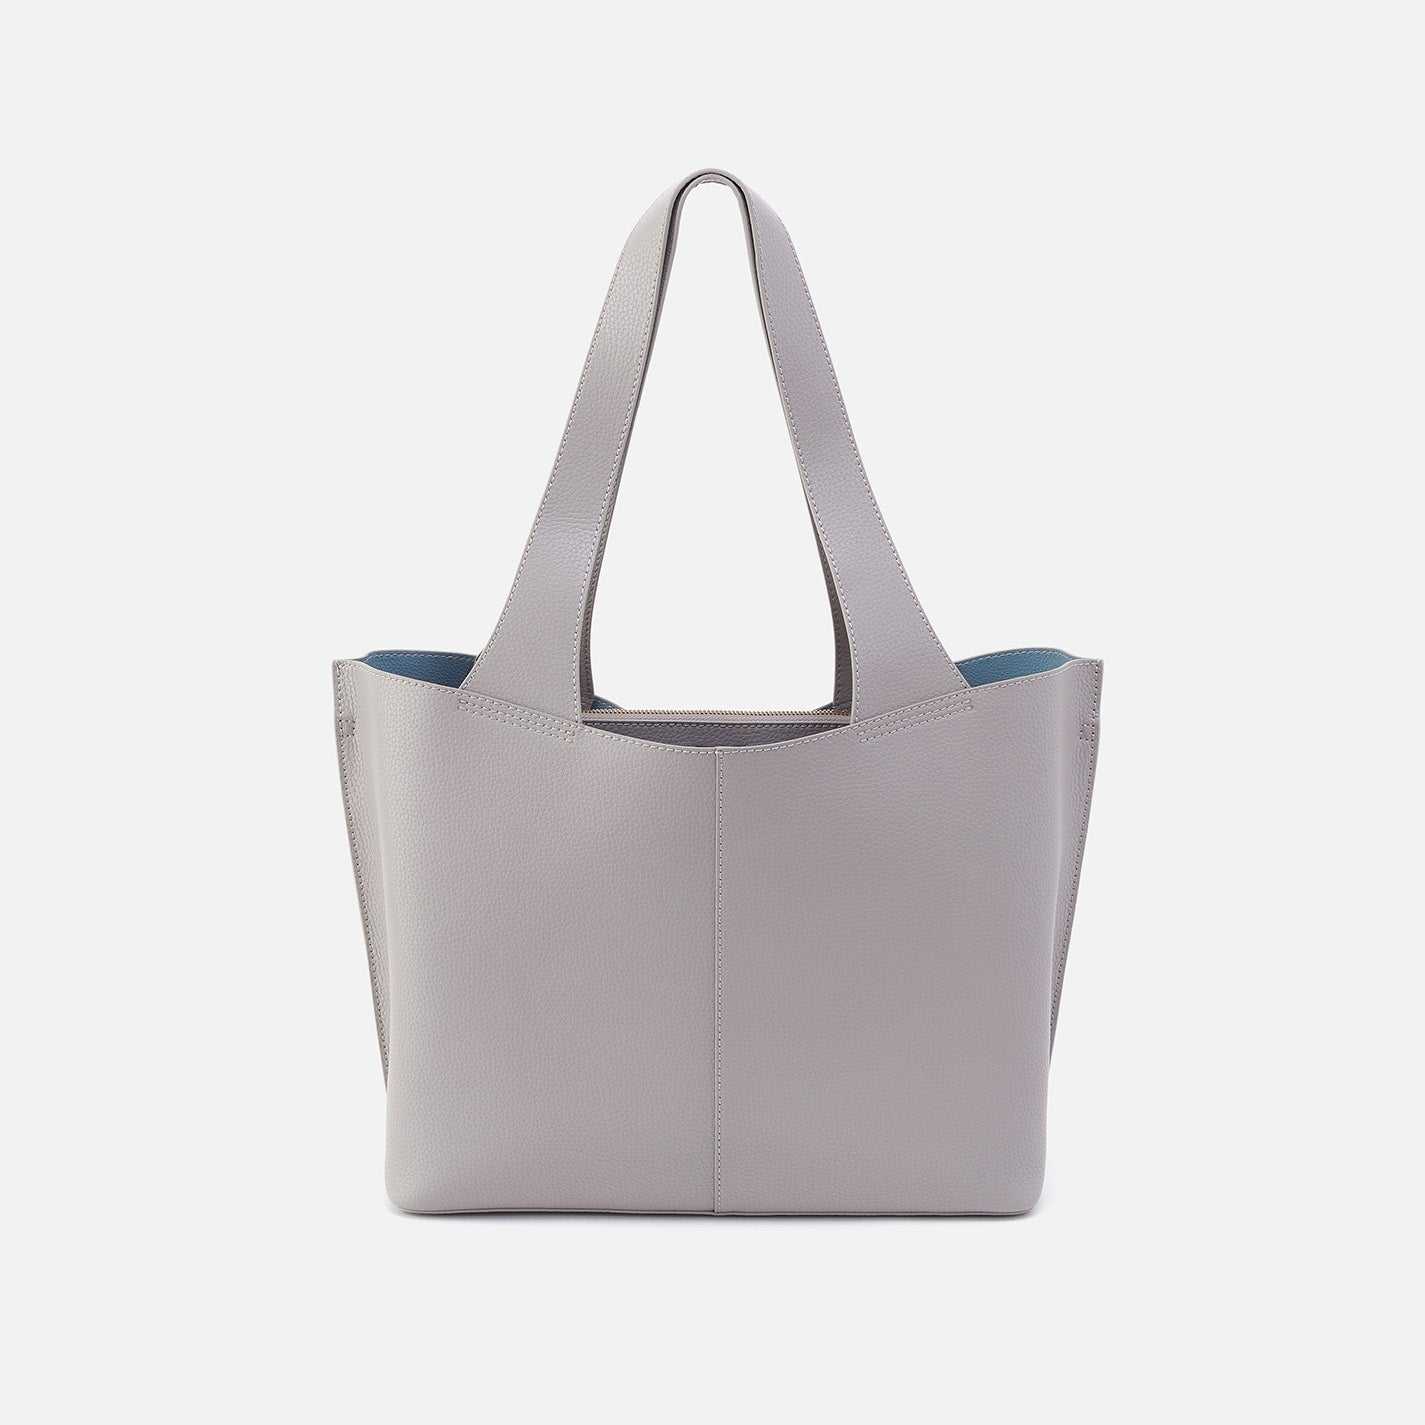 Vida Tote In Micro Pebbled Leather - Morning Dove Grey Tote Bag in Morning Dove Grey | Hobo®